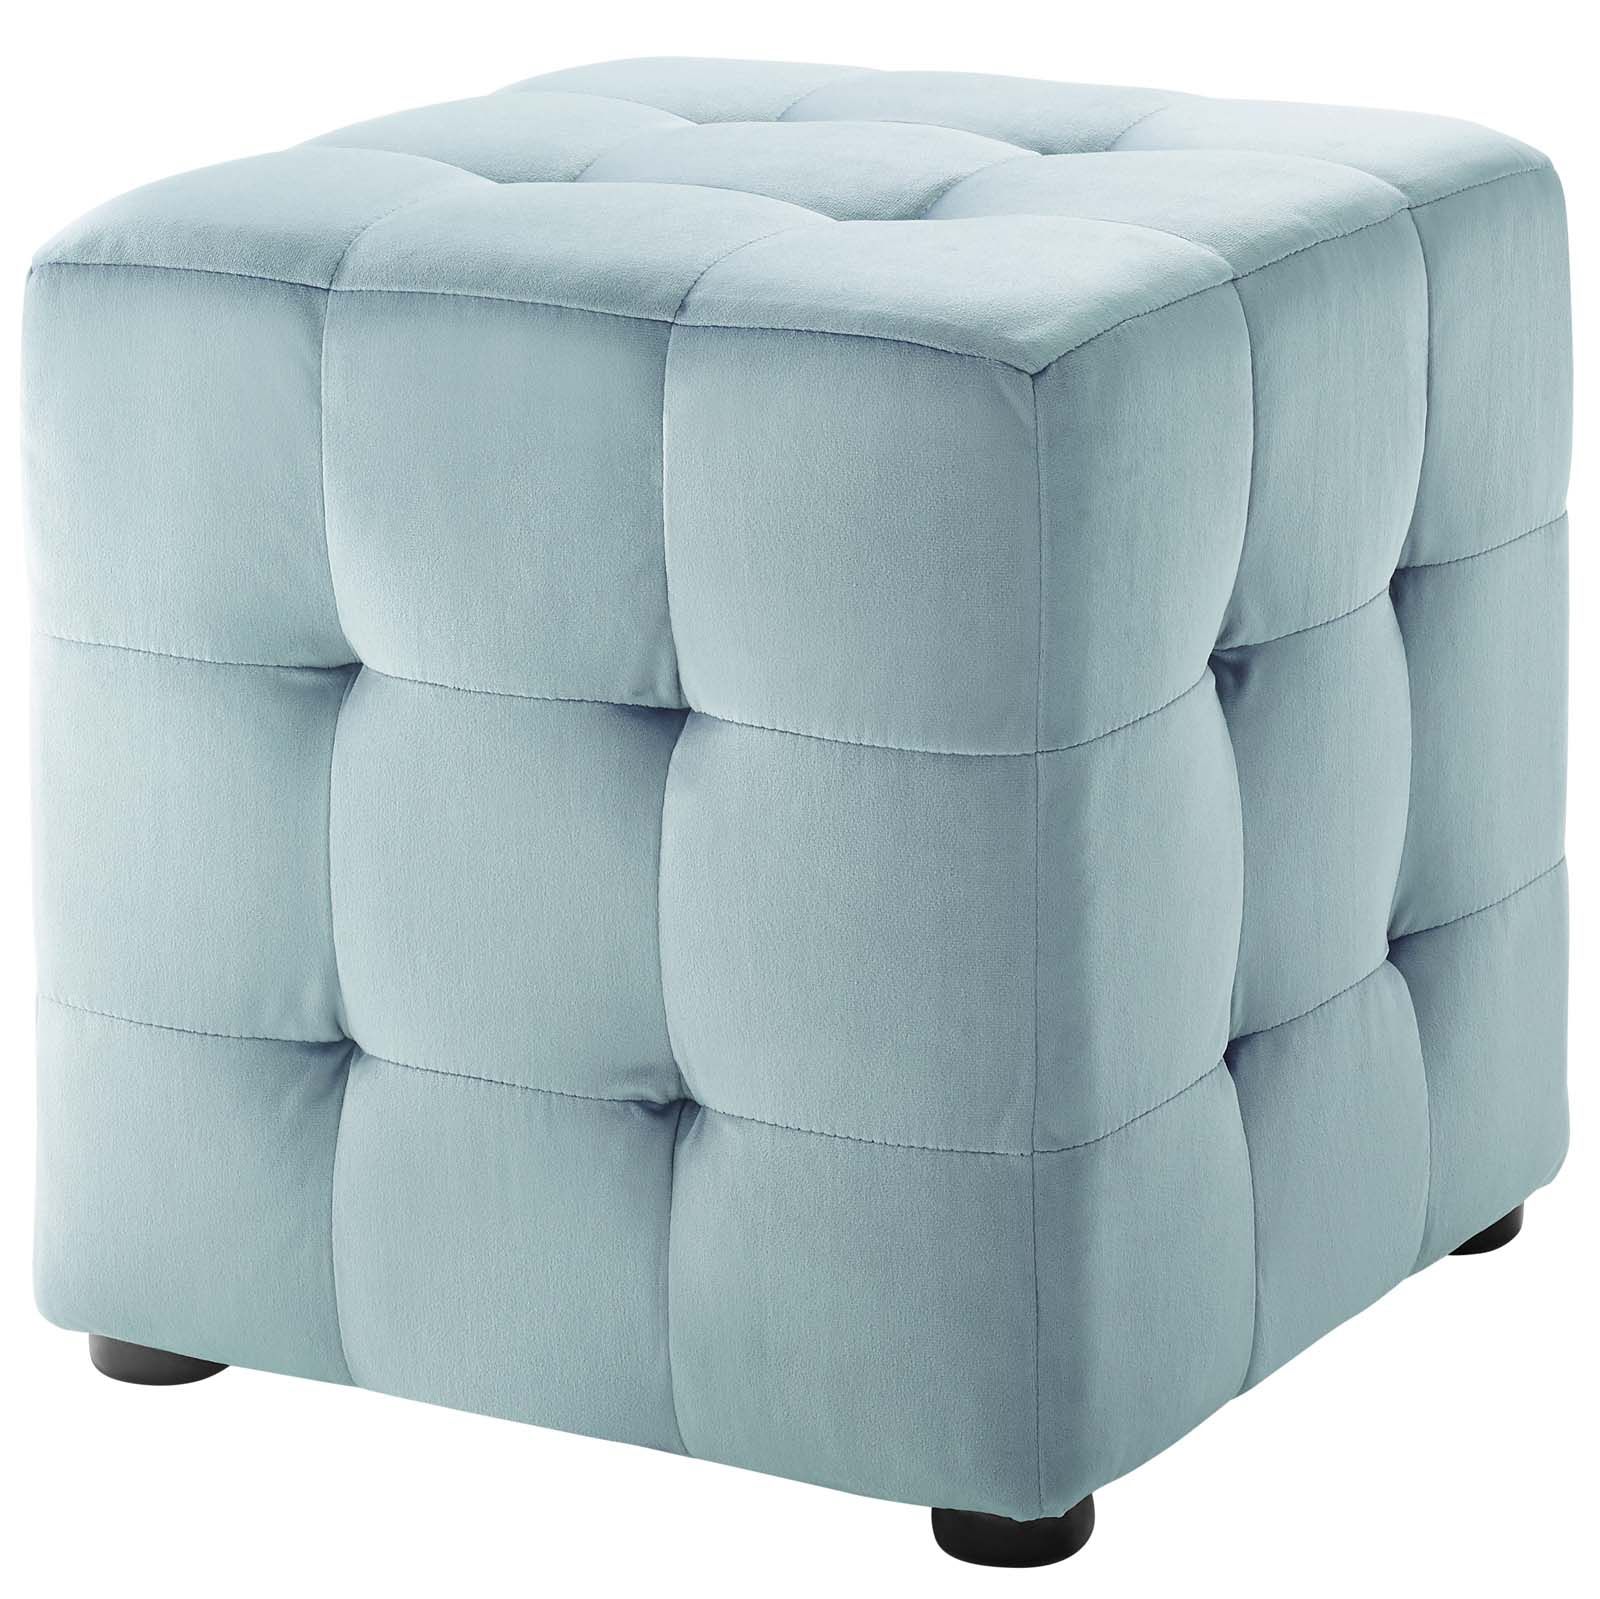 Cream Fabric Tufted Oval Ottomans Throughout Most Popular Contour Tufted Cube Performance Velvet Ottoman Light Blue (View 7 of 10)